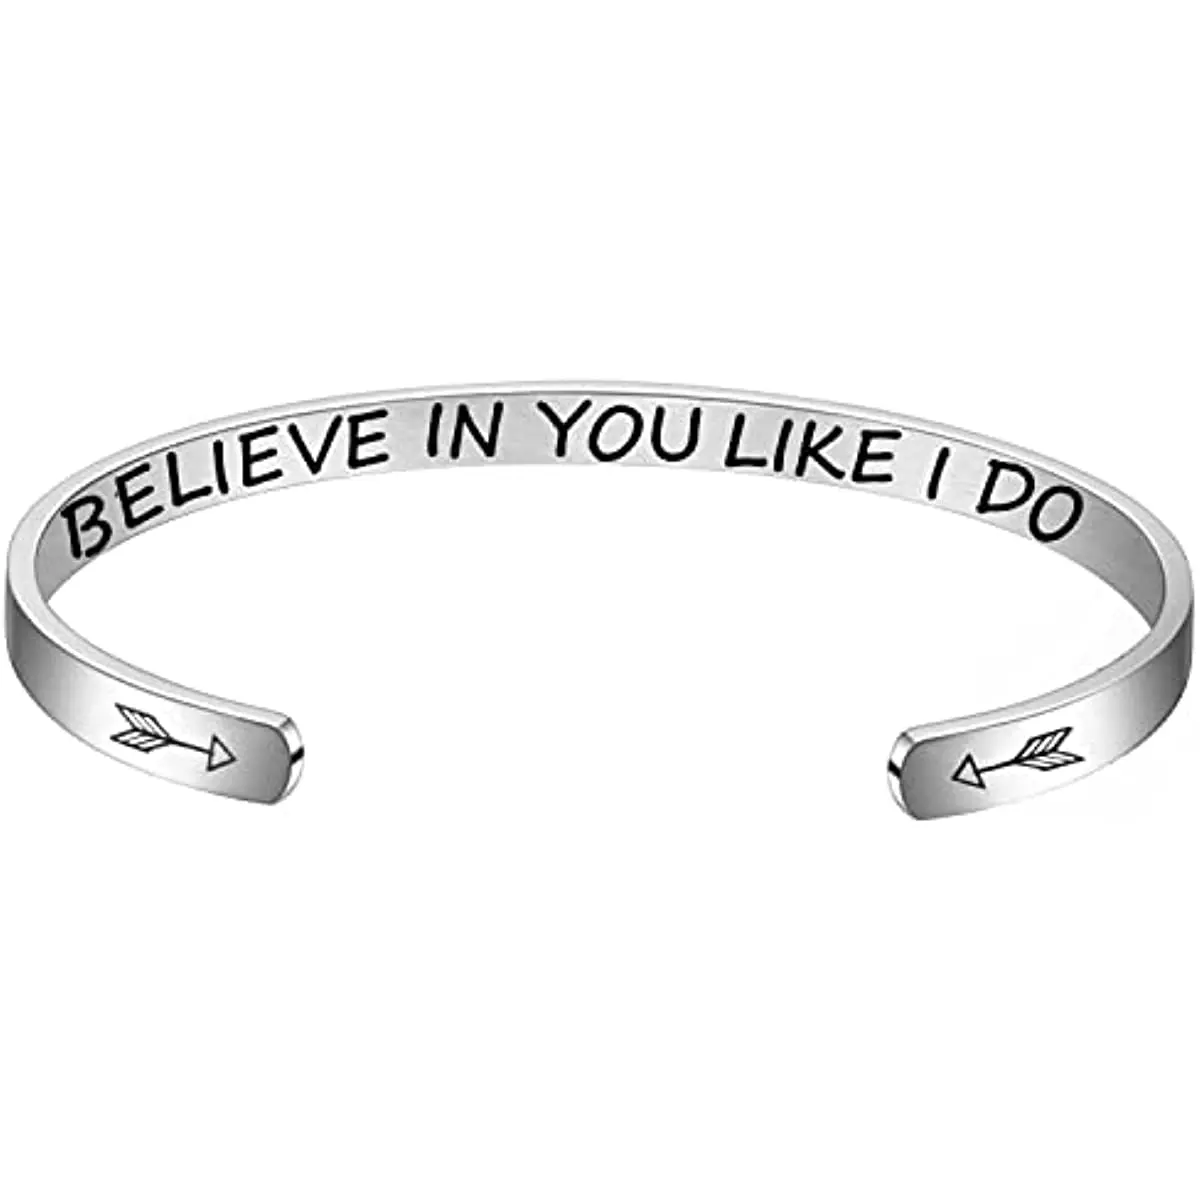 

New inspirational bracelet for women girls personalized inspirational mantra carving 316L stainless steel jewelry bracelet